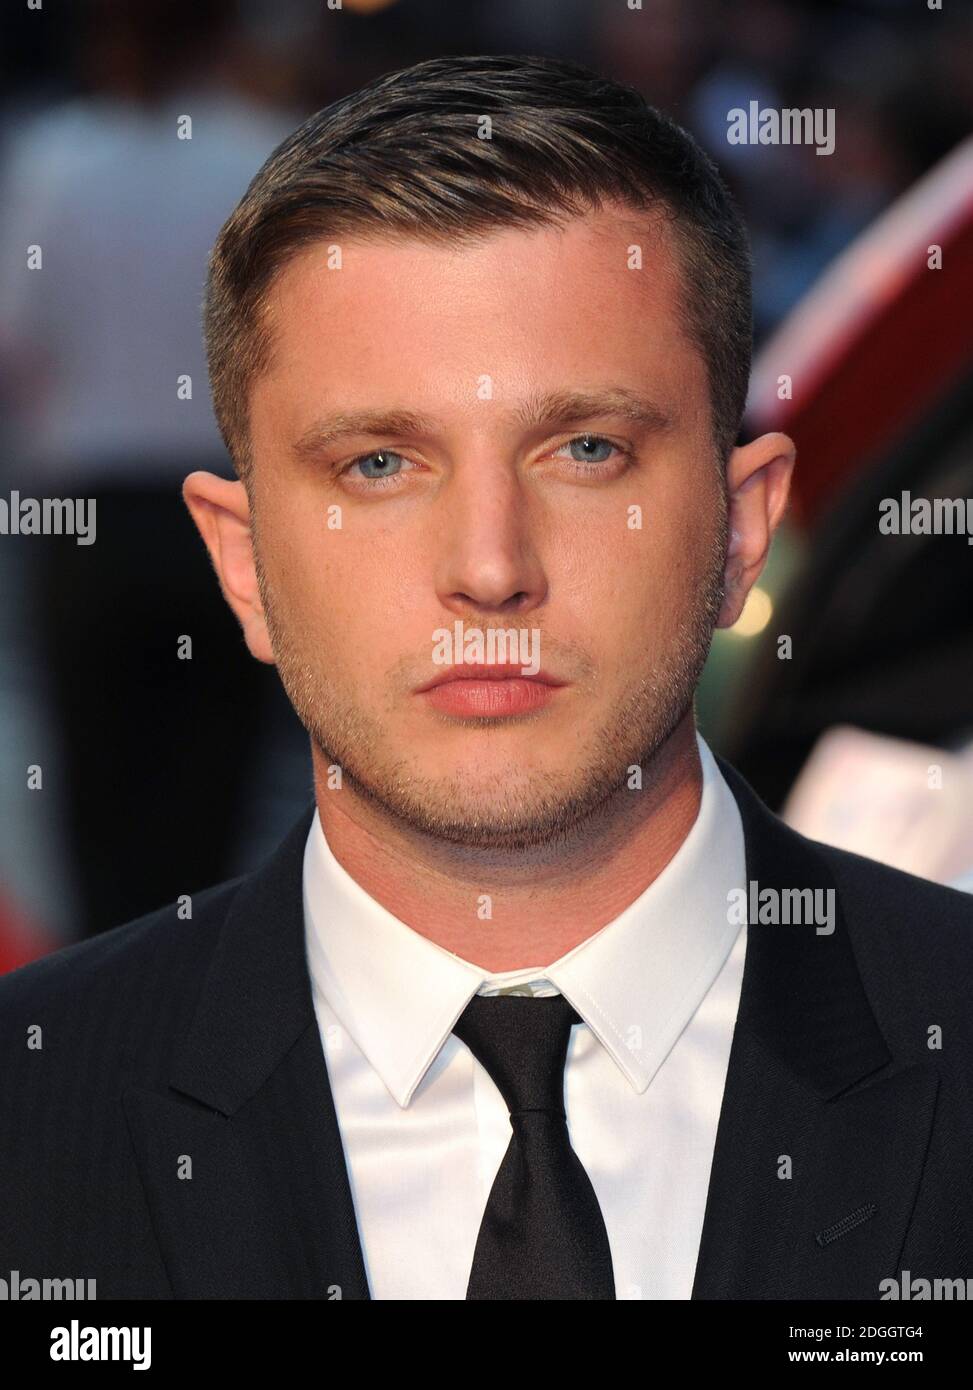 Ben Drew aka Plan B arriving at the World Premiere of The Sweeney, Vue Cinema, Leicester Square, London. Stock Photo